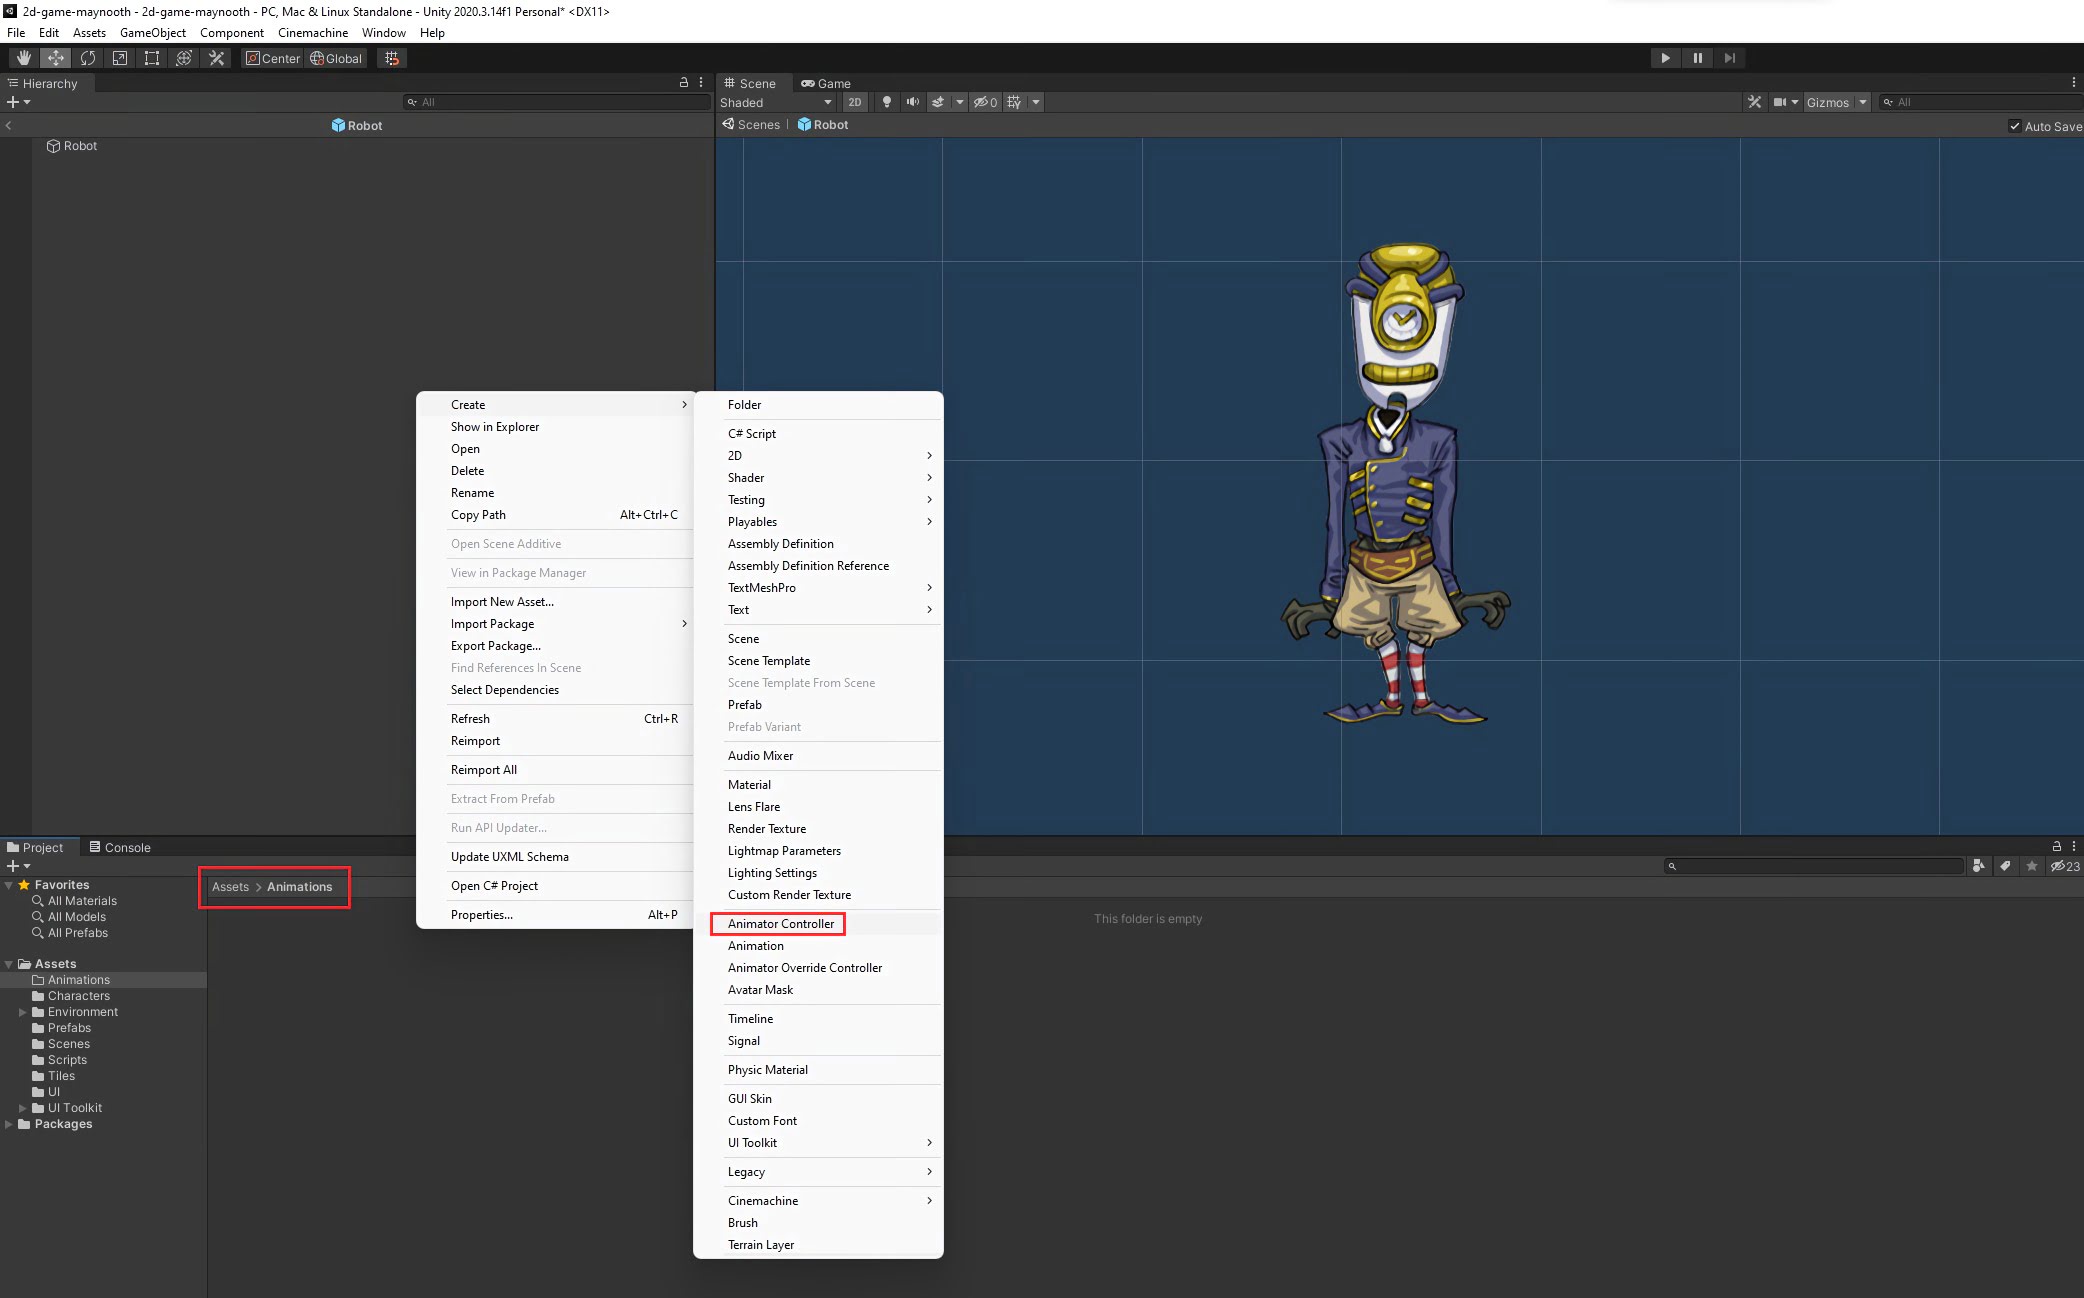 (../img/unity-14-2d-game-10-animation/2d-game-animation-step-1-2.jpg)